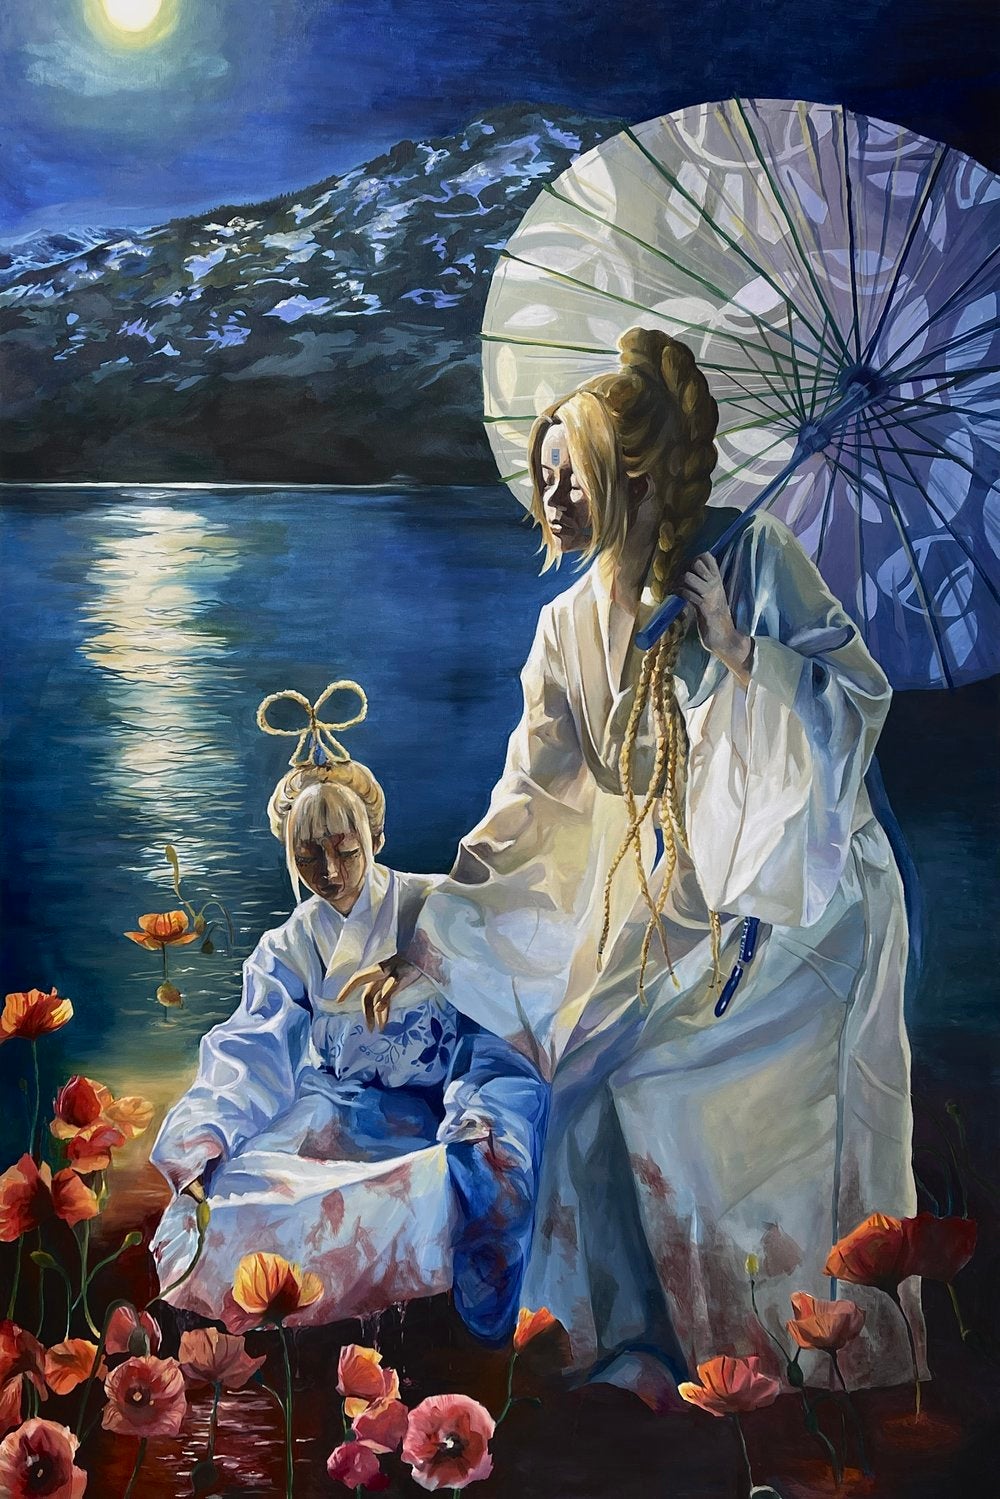 Illustration of two women washing blood from their clothes in the lake surrounded by poppy flowers under the moonlight